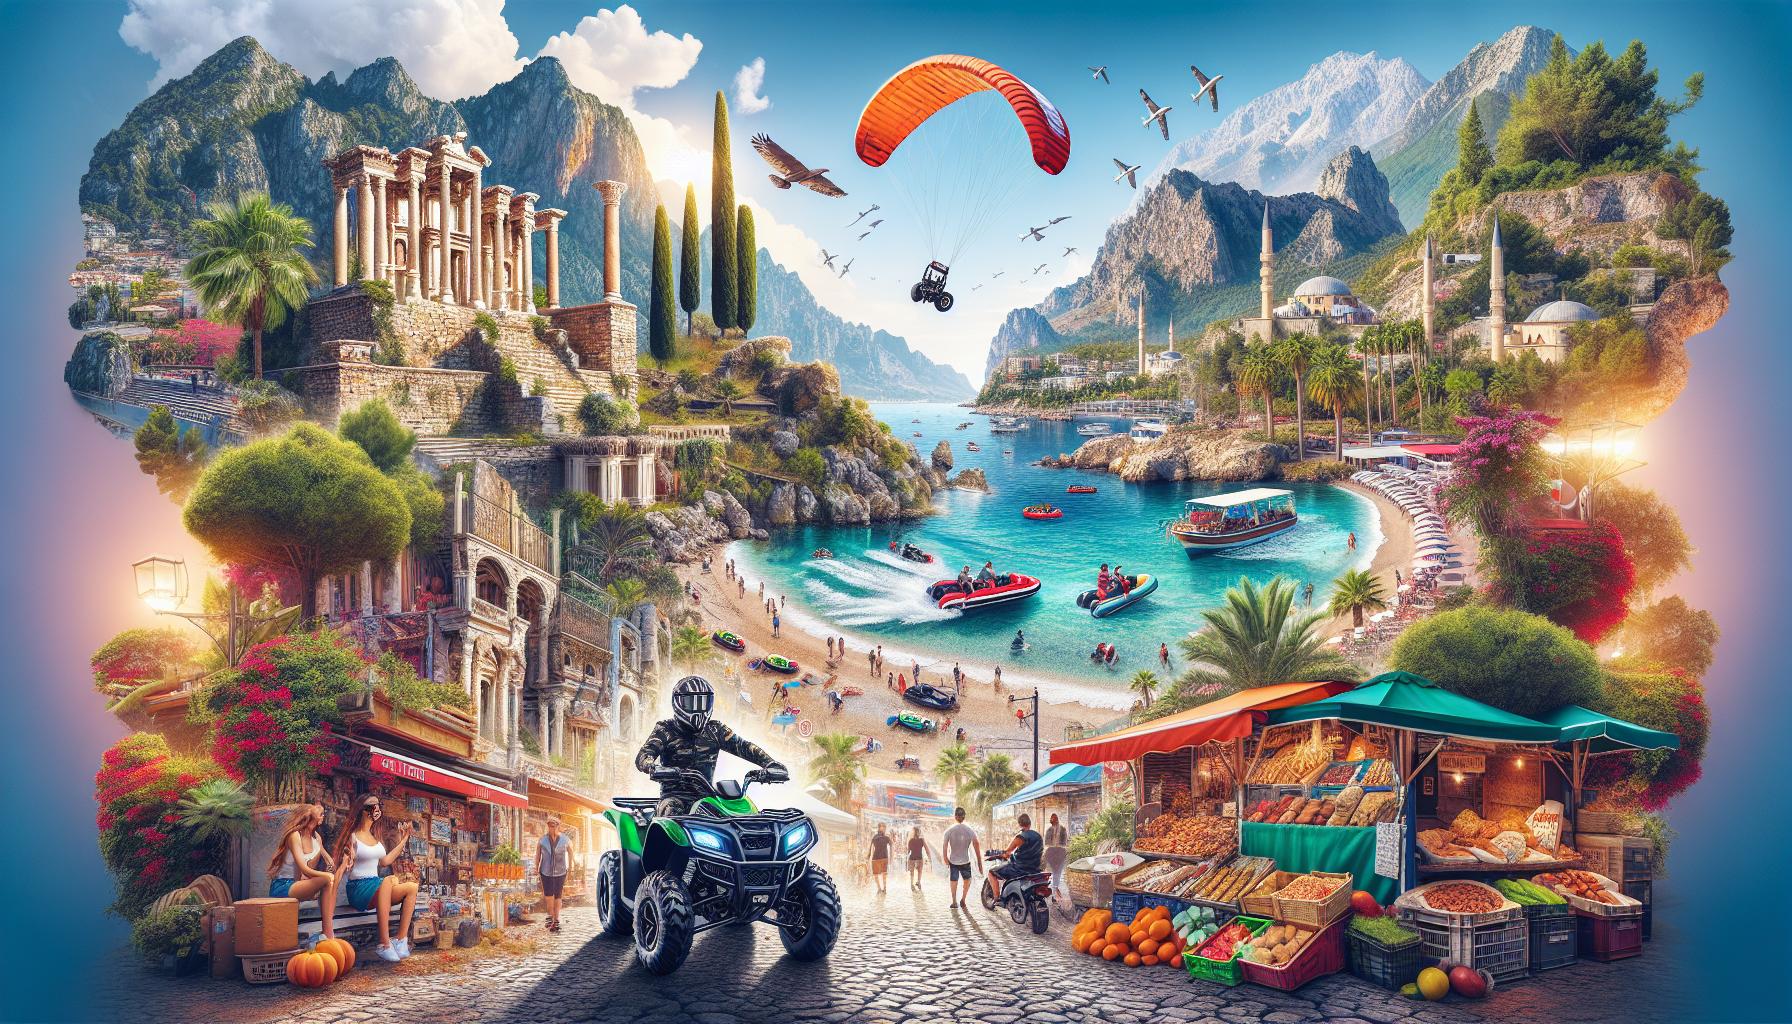 Discover Thrills with an Unforgettable Antalya Quad Tour!